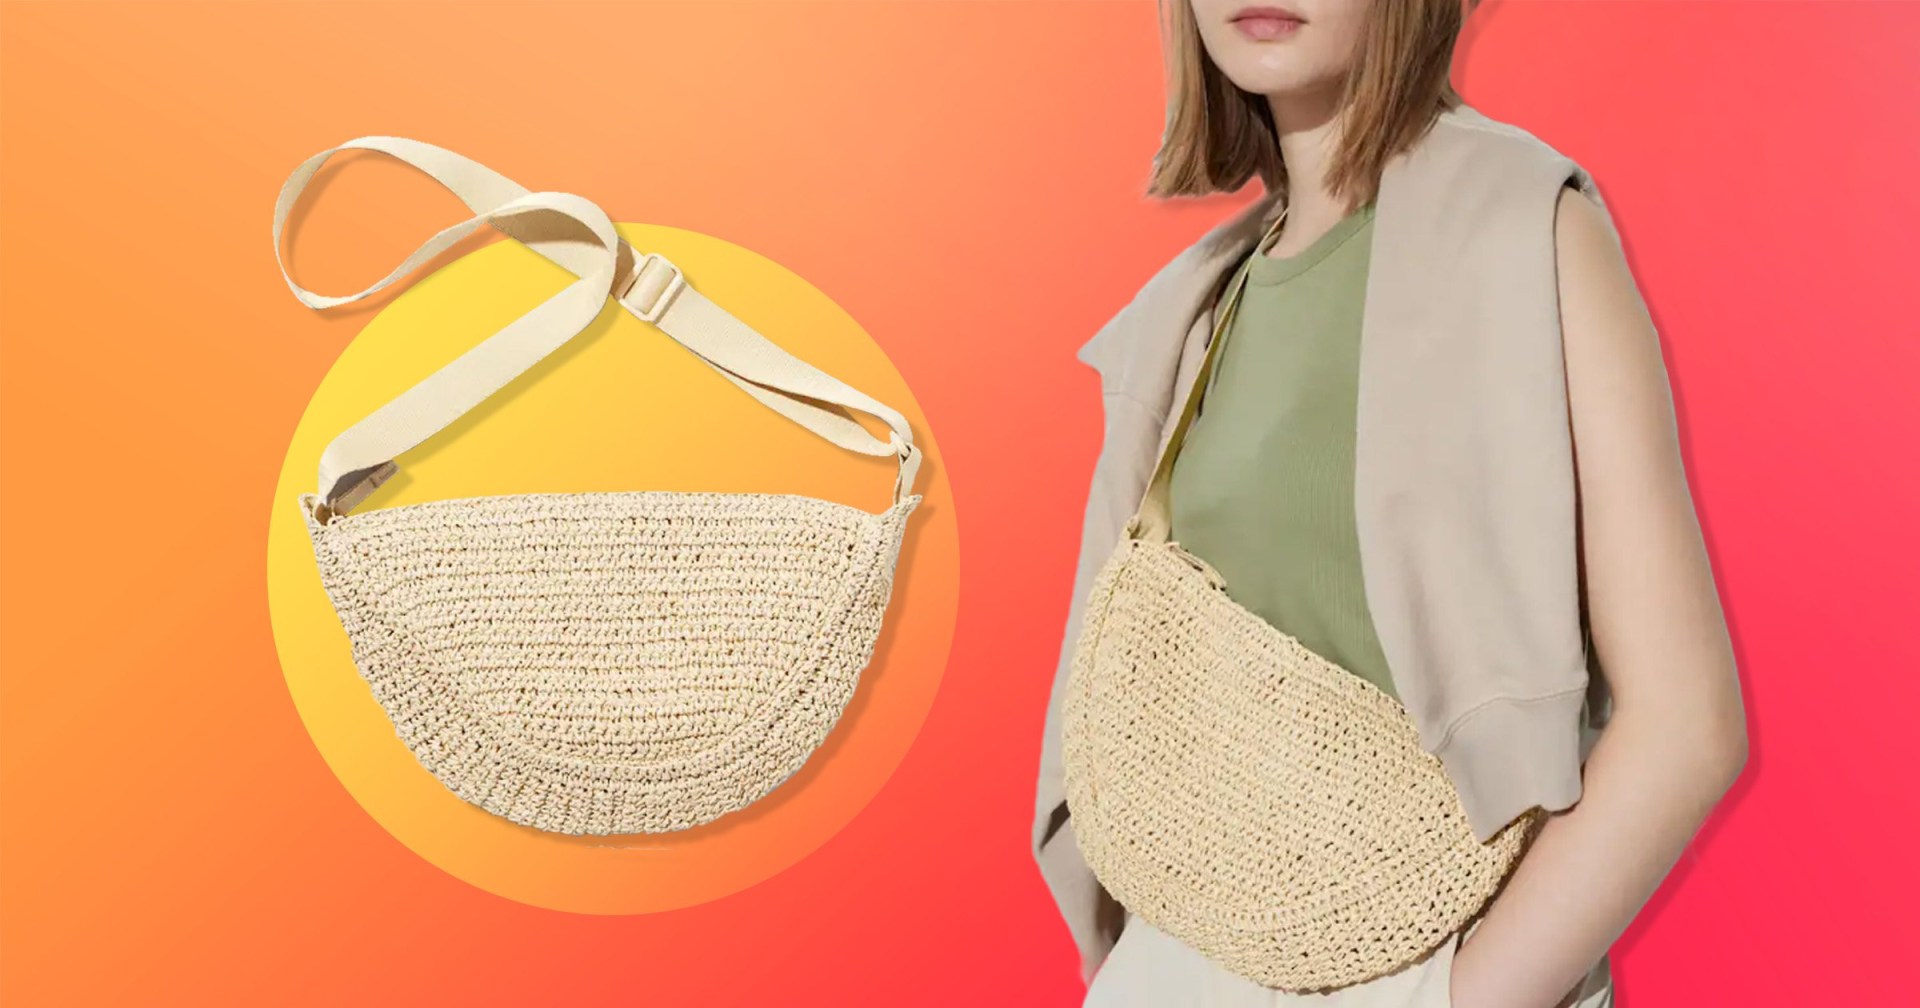 uniqlo launches spring update of viral crossbody bag that shoppers are calling ‘perfect’